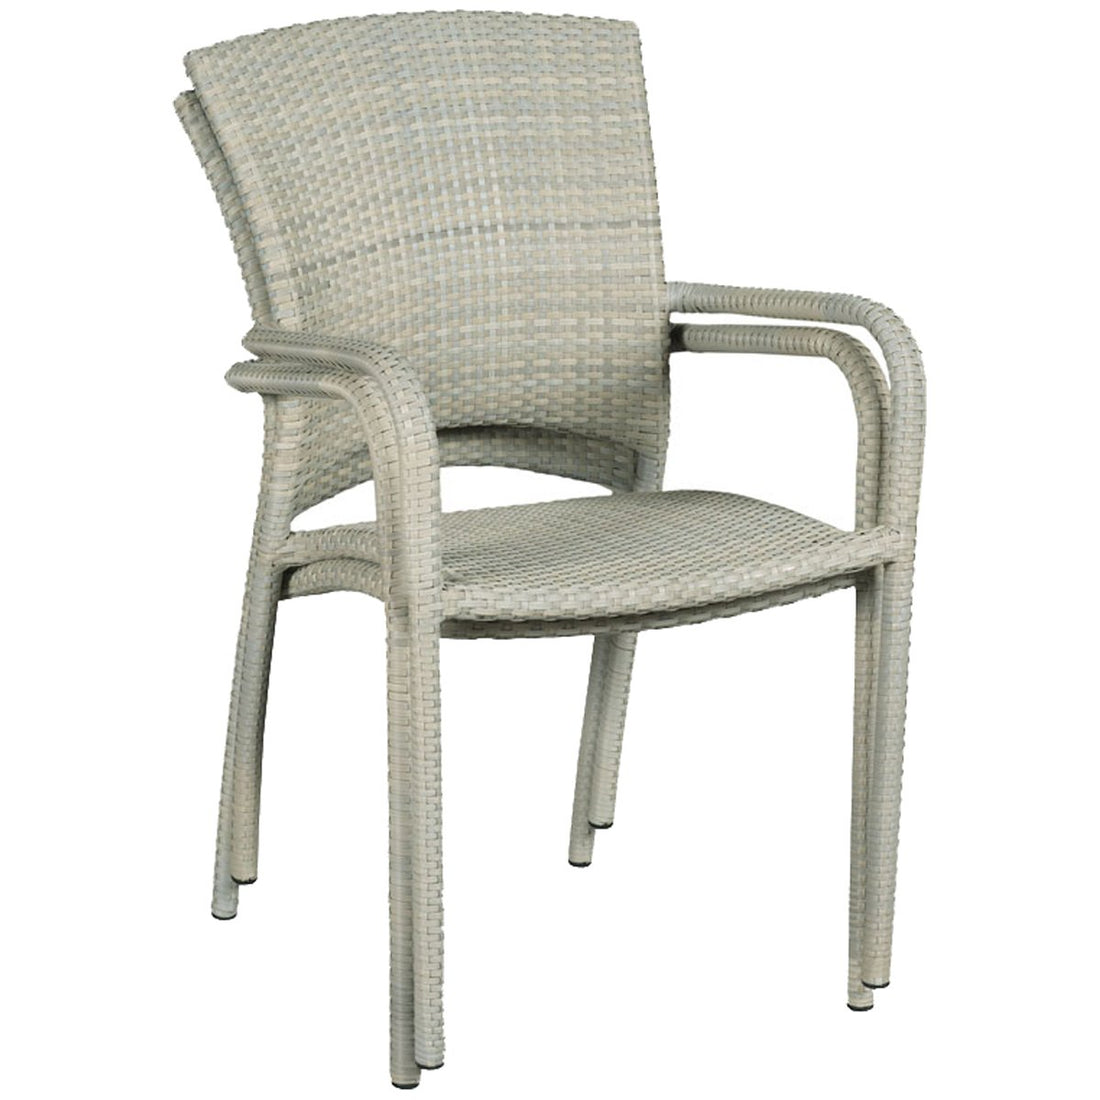 Woodbridge Furniture Cafe Outdoor Stacking Chair, Set of 4